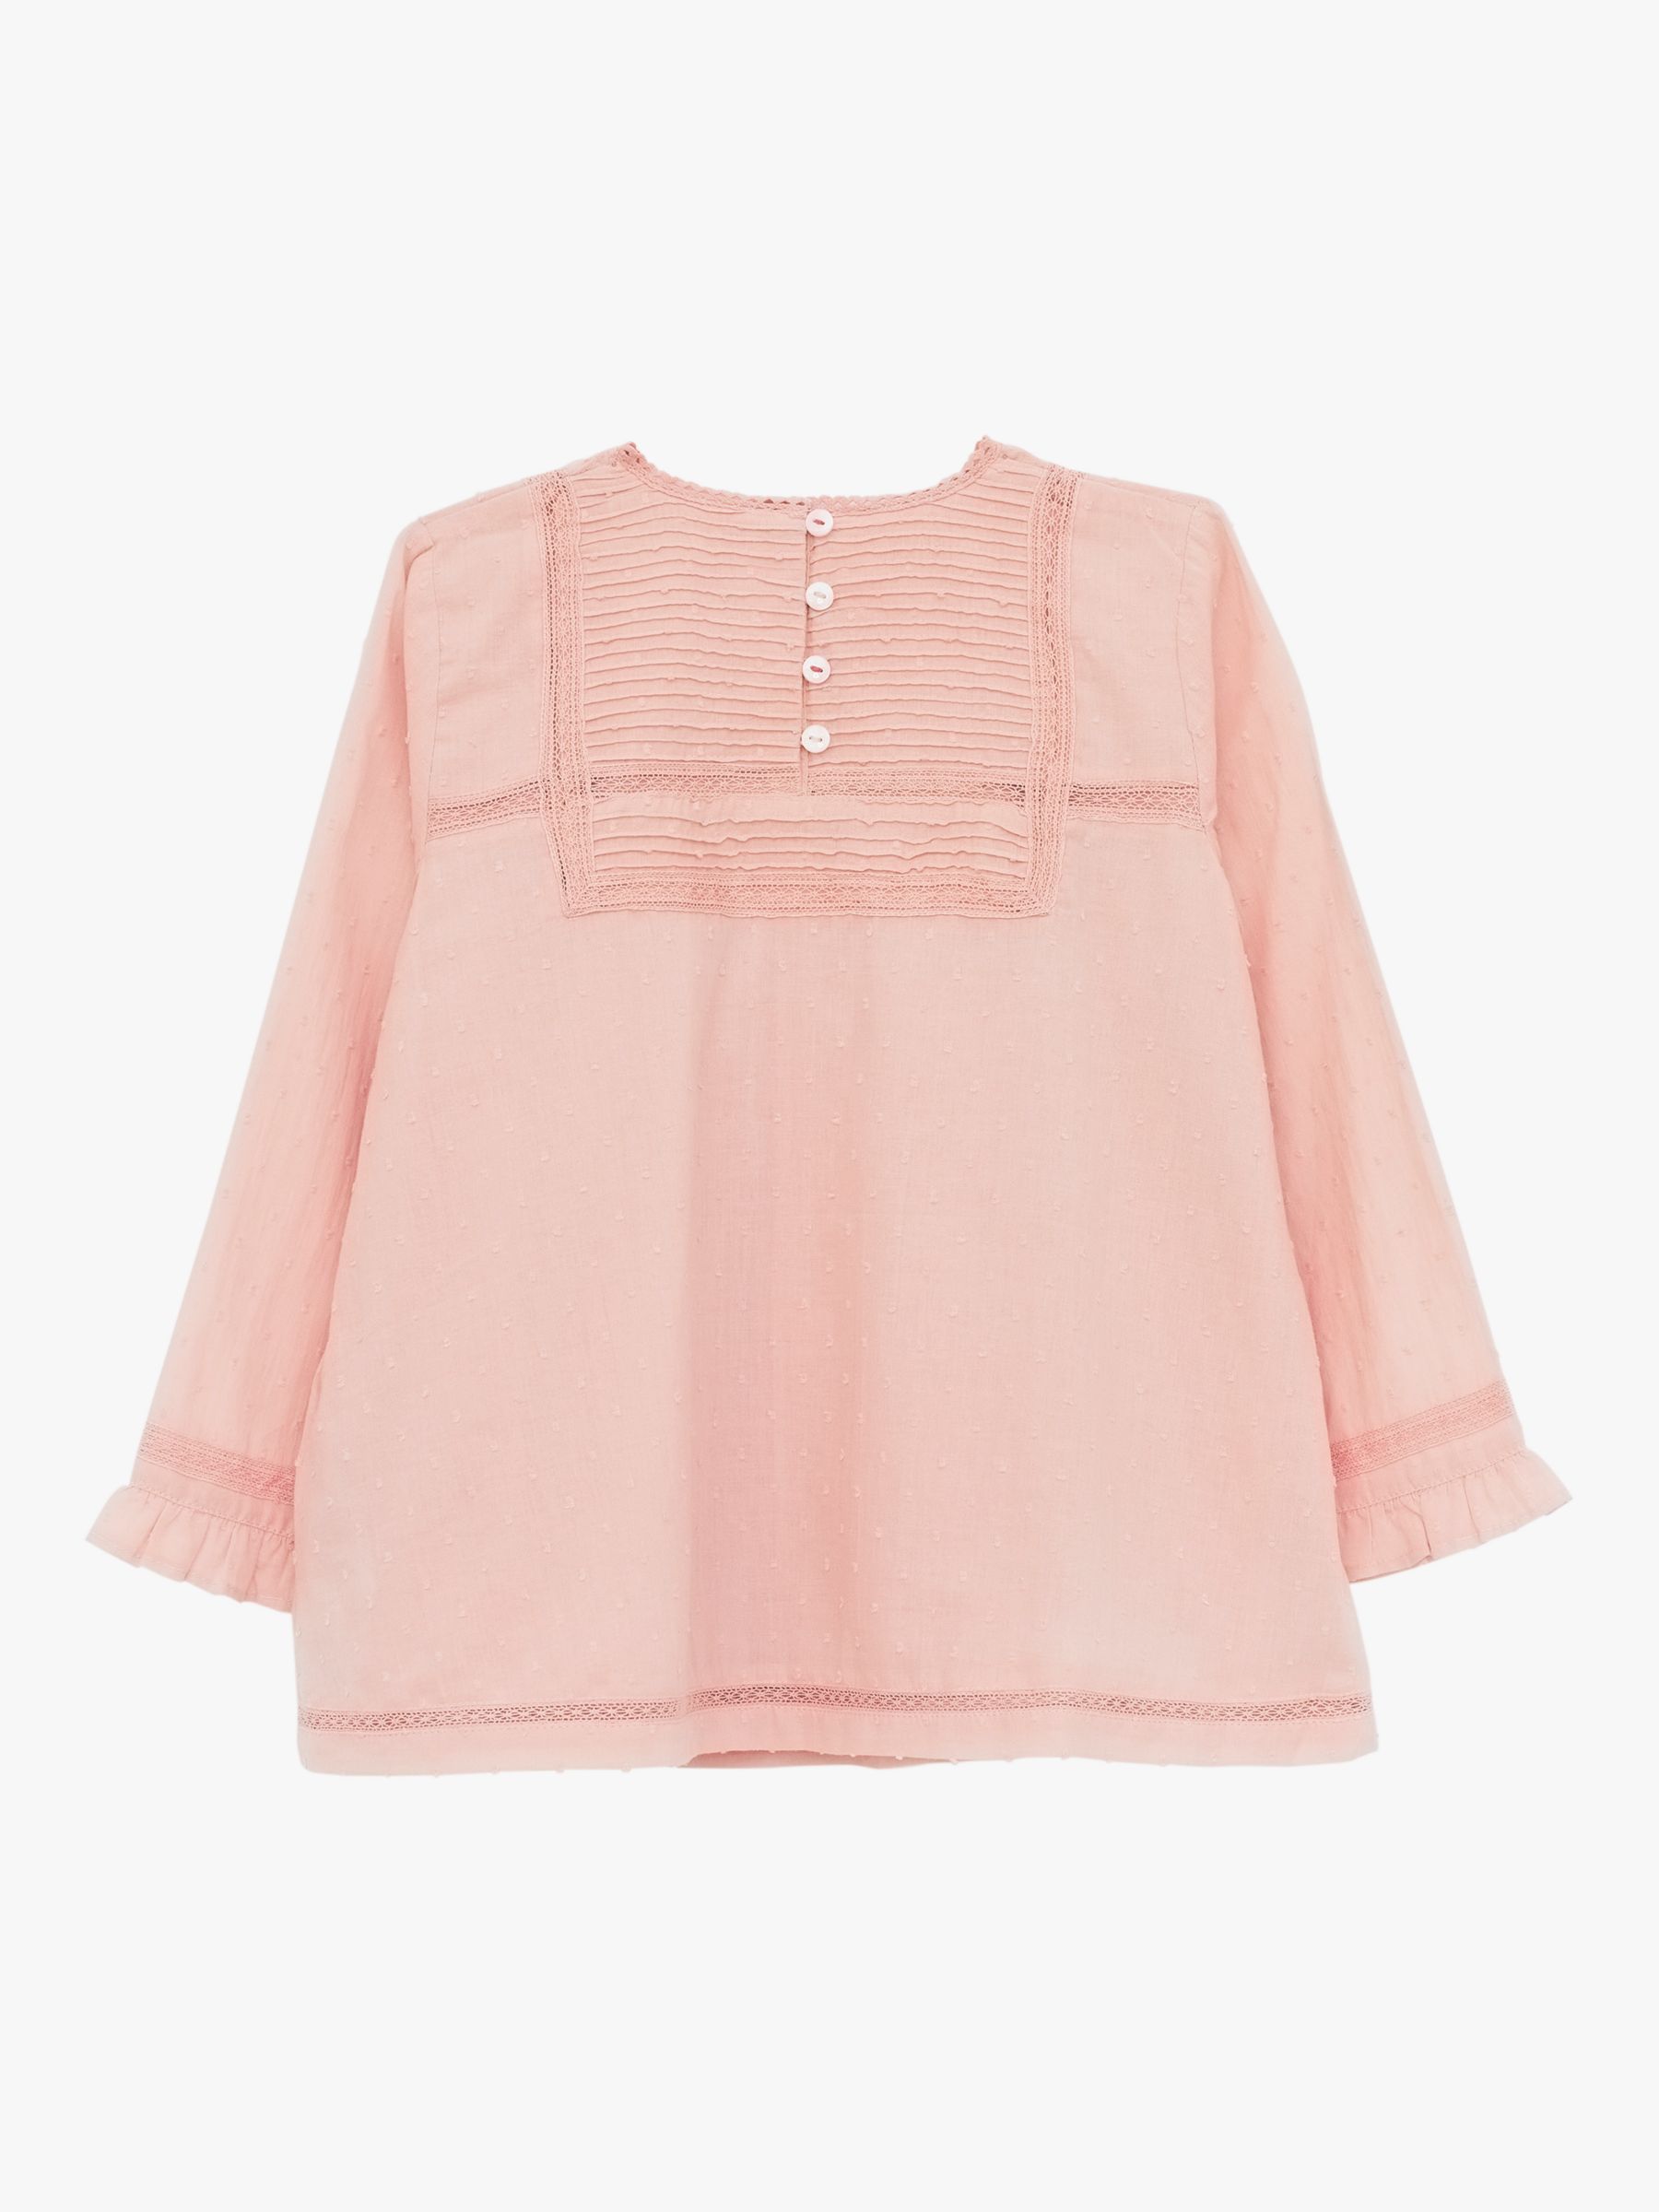 White Stuff Kids' Holly Elevated Top, Pink